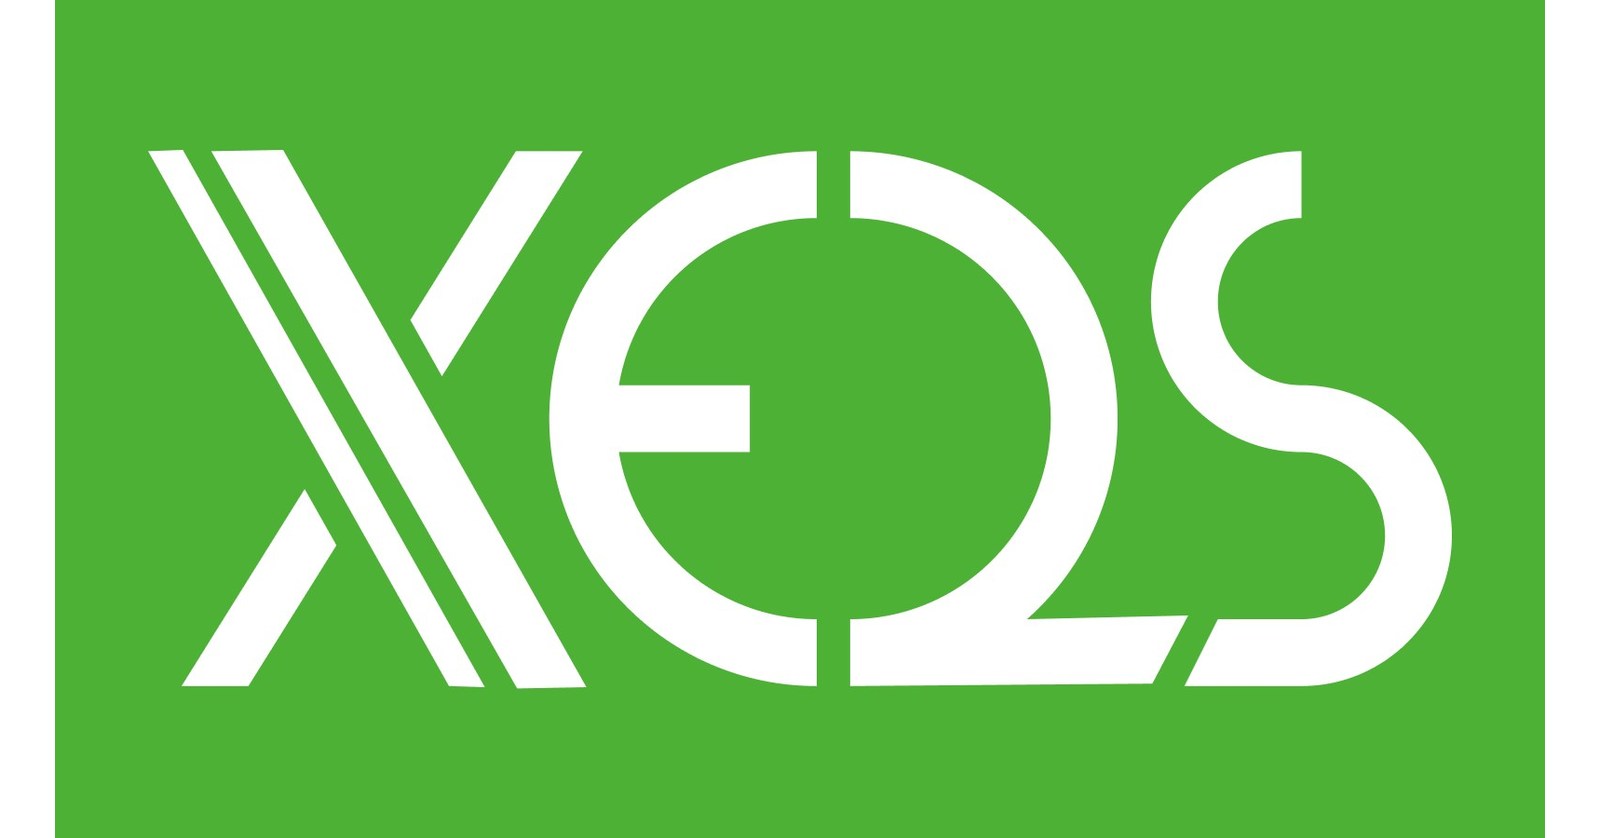 XELS, an eco-conscious blockchain platform for getting and ...